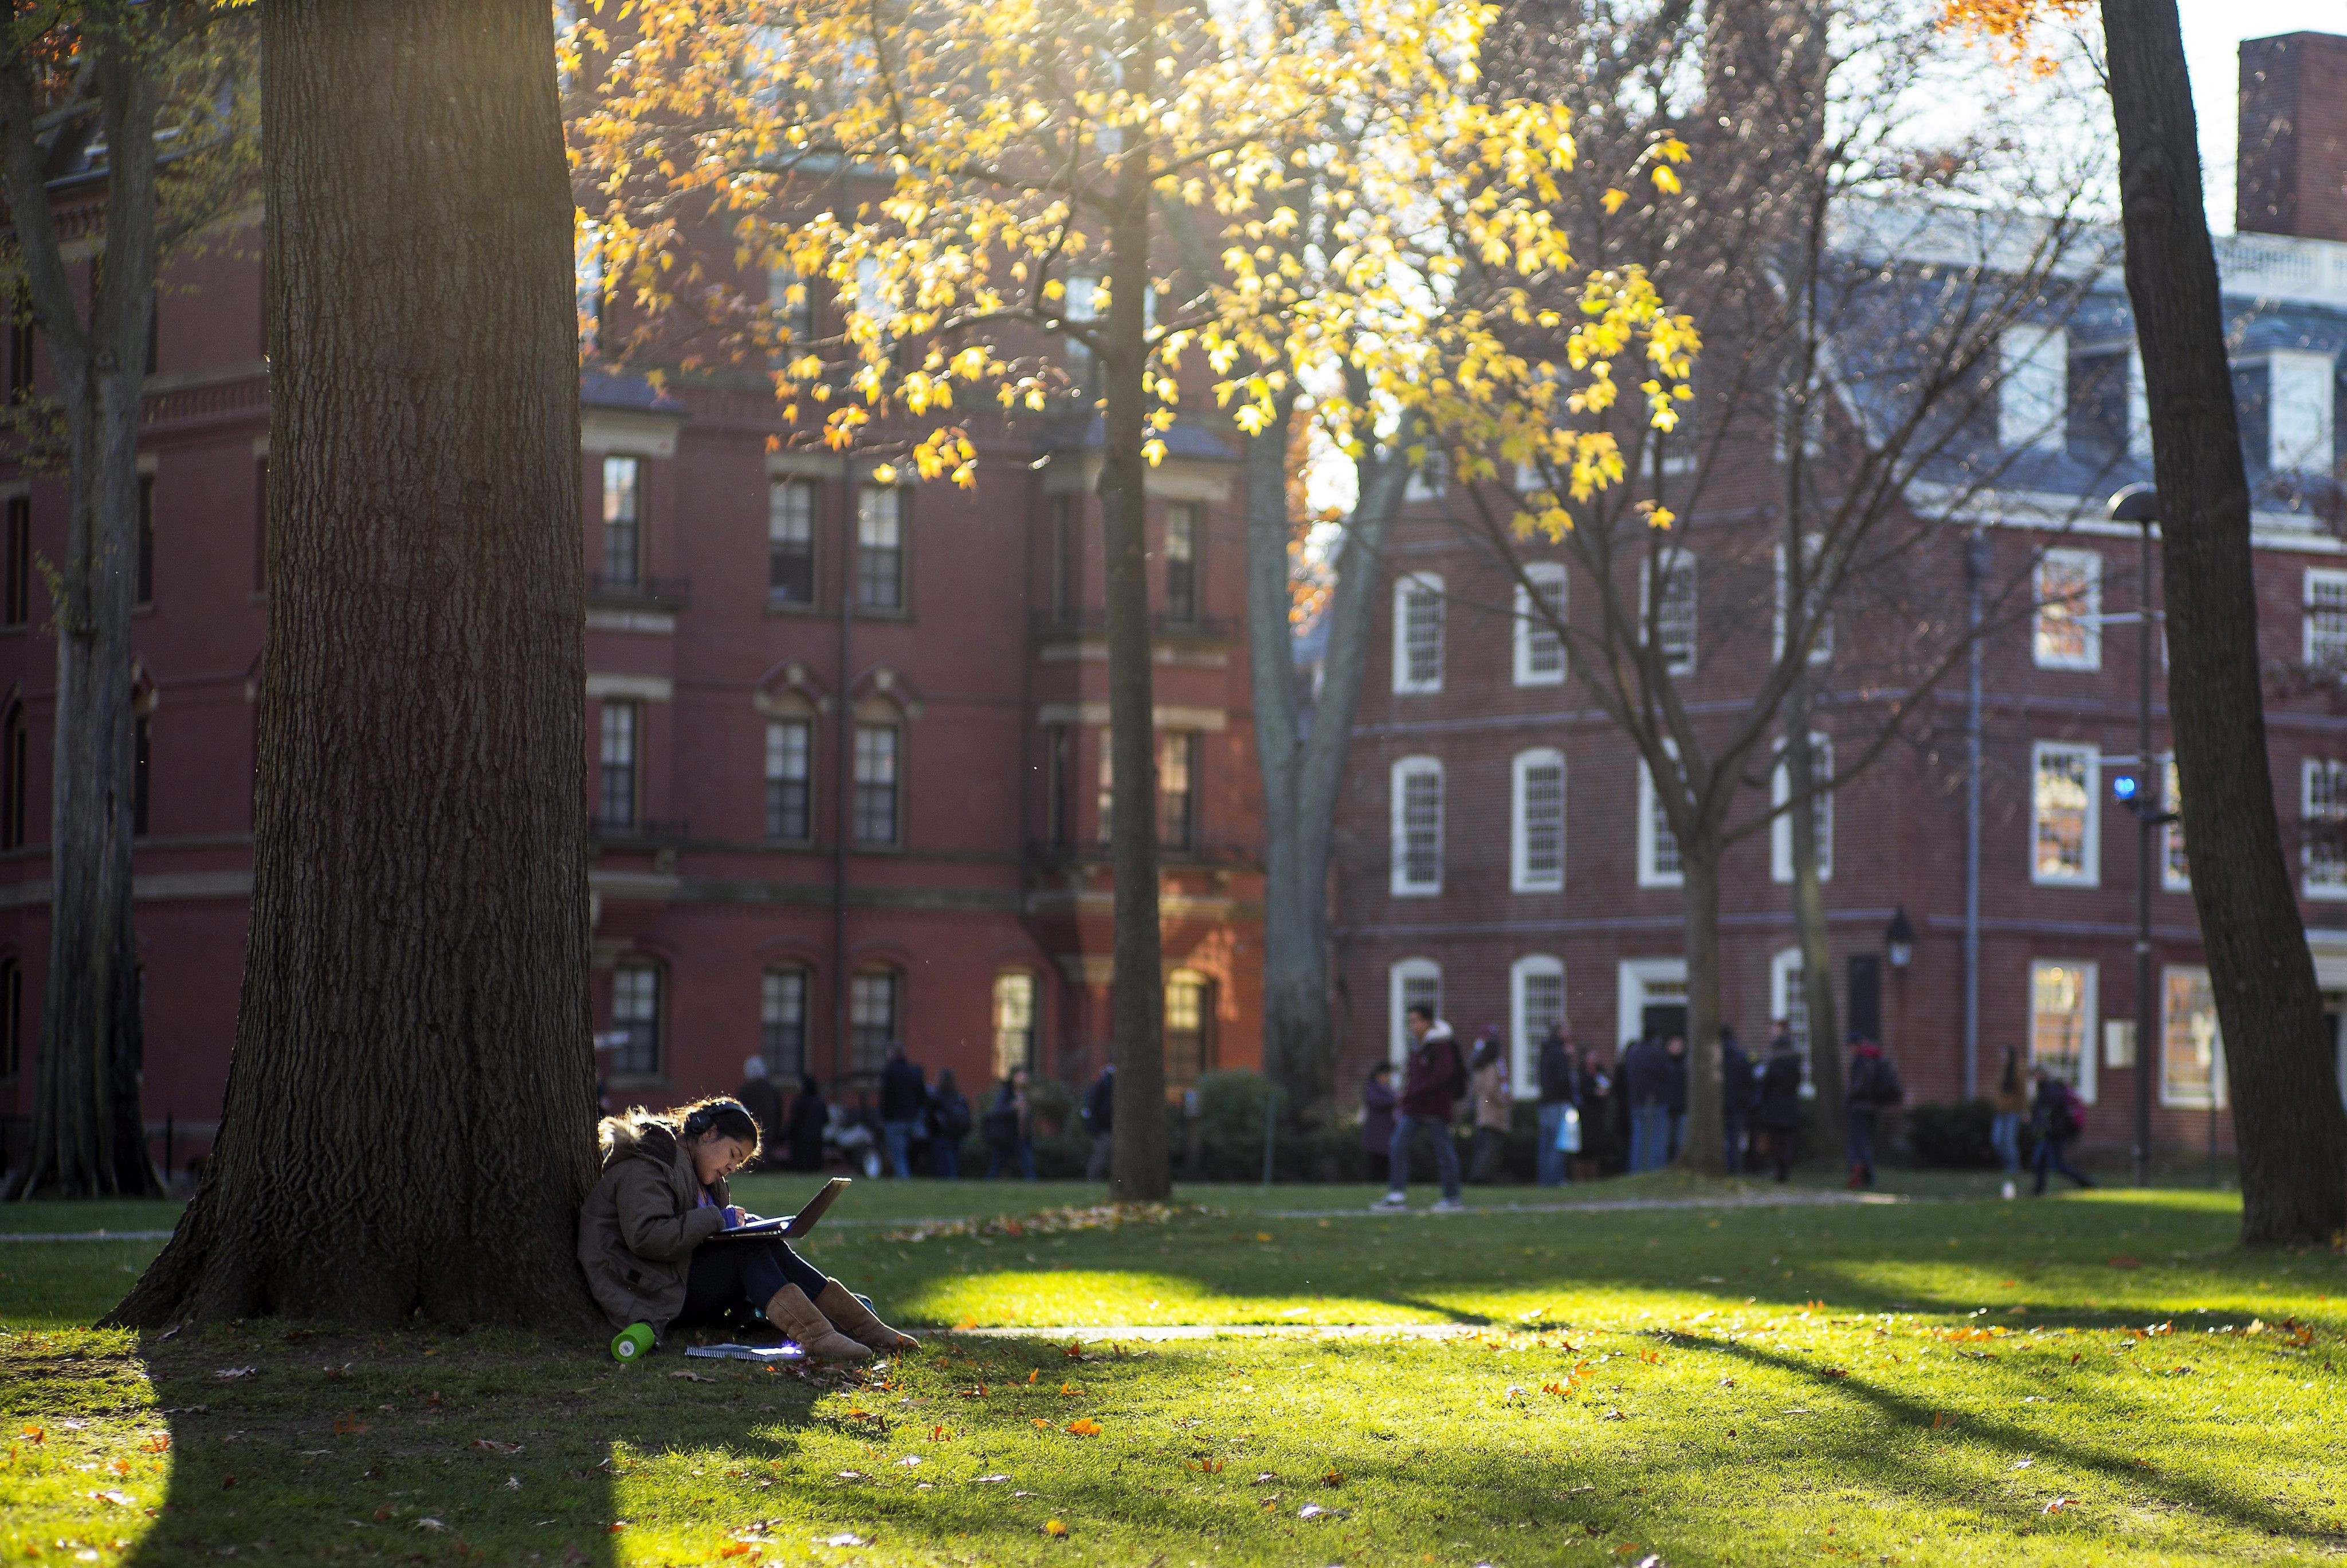 A student works under a tree at the Harvard University campus in Cambridge, Massachusetts, in November 2016. The university has been taken to court for its admission practices that some argue discriminate against Asian-Americans. Photo: EPA